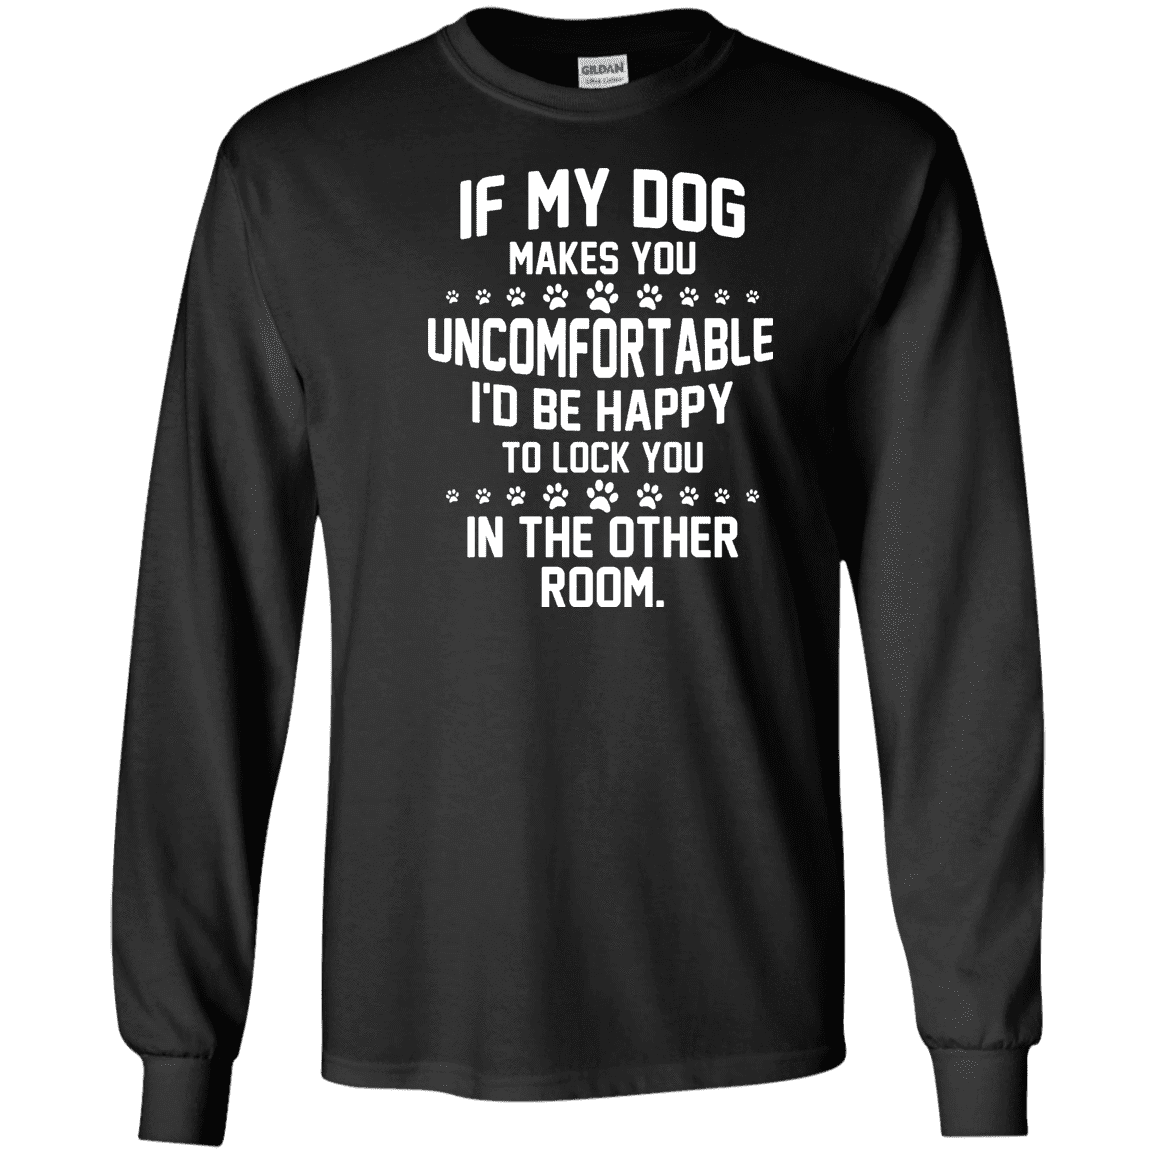 If My Dog Makes You Uncomfortable - Long Sleeve T Shirt – Rescuers Club